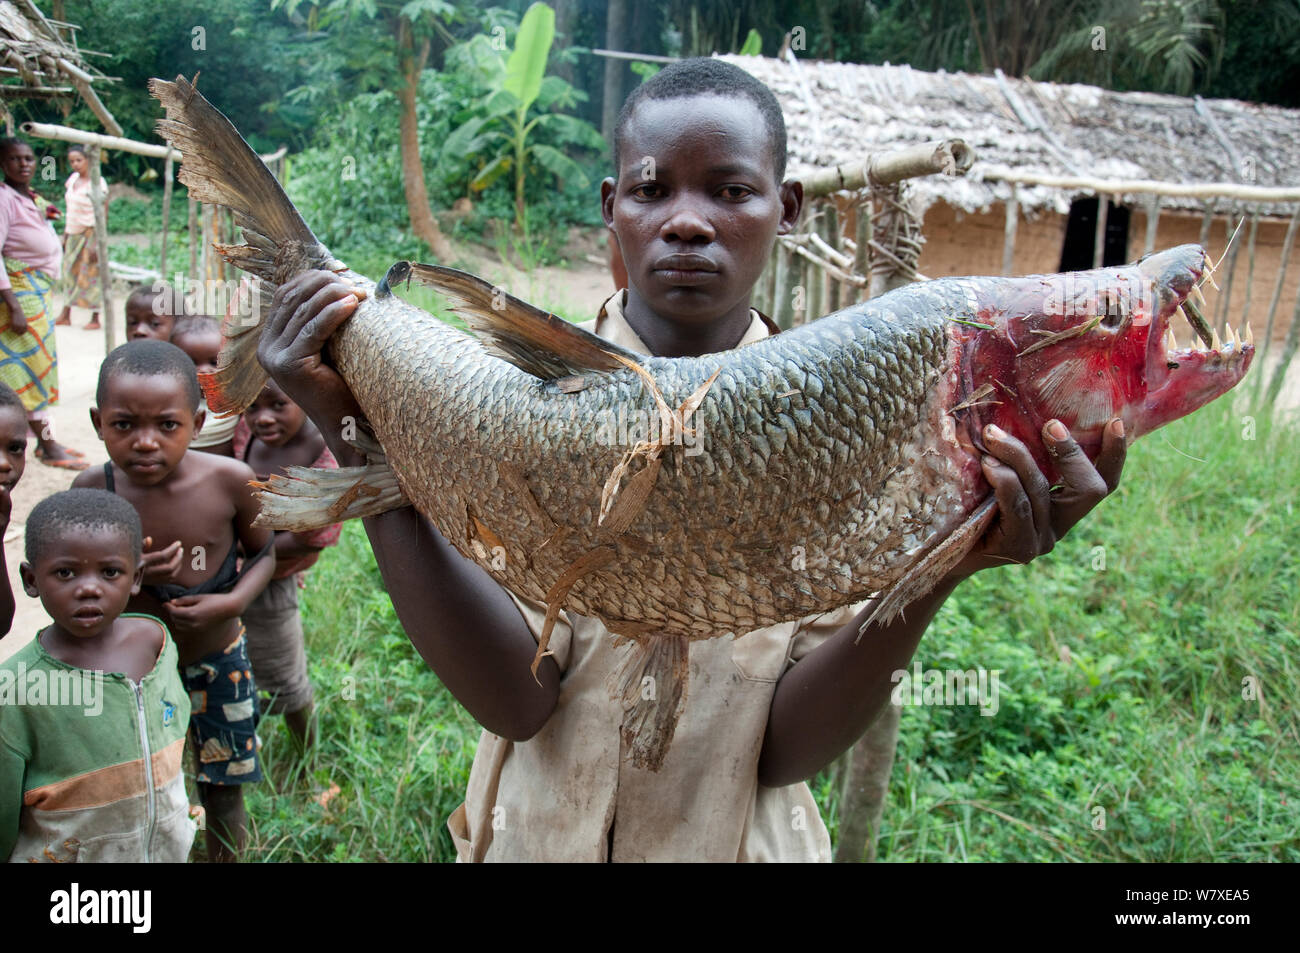 Mongo man selling large Goliath tiger fish (Hydrocynus goliath) with red face during the breeding season, Bomili Village, Ituri Rainforest, Democratic Republic of the Congo, December 2011. Stock Photo